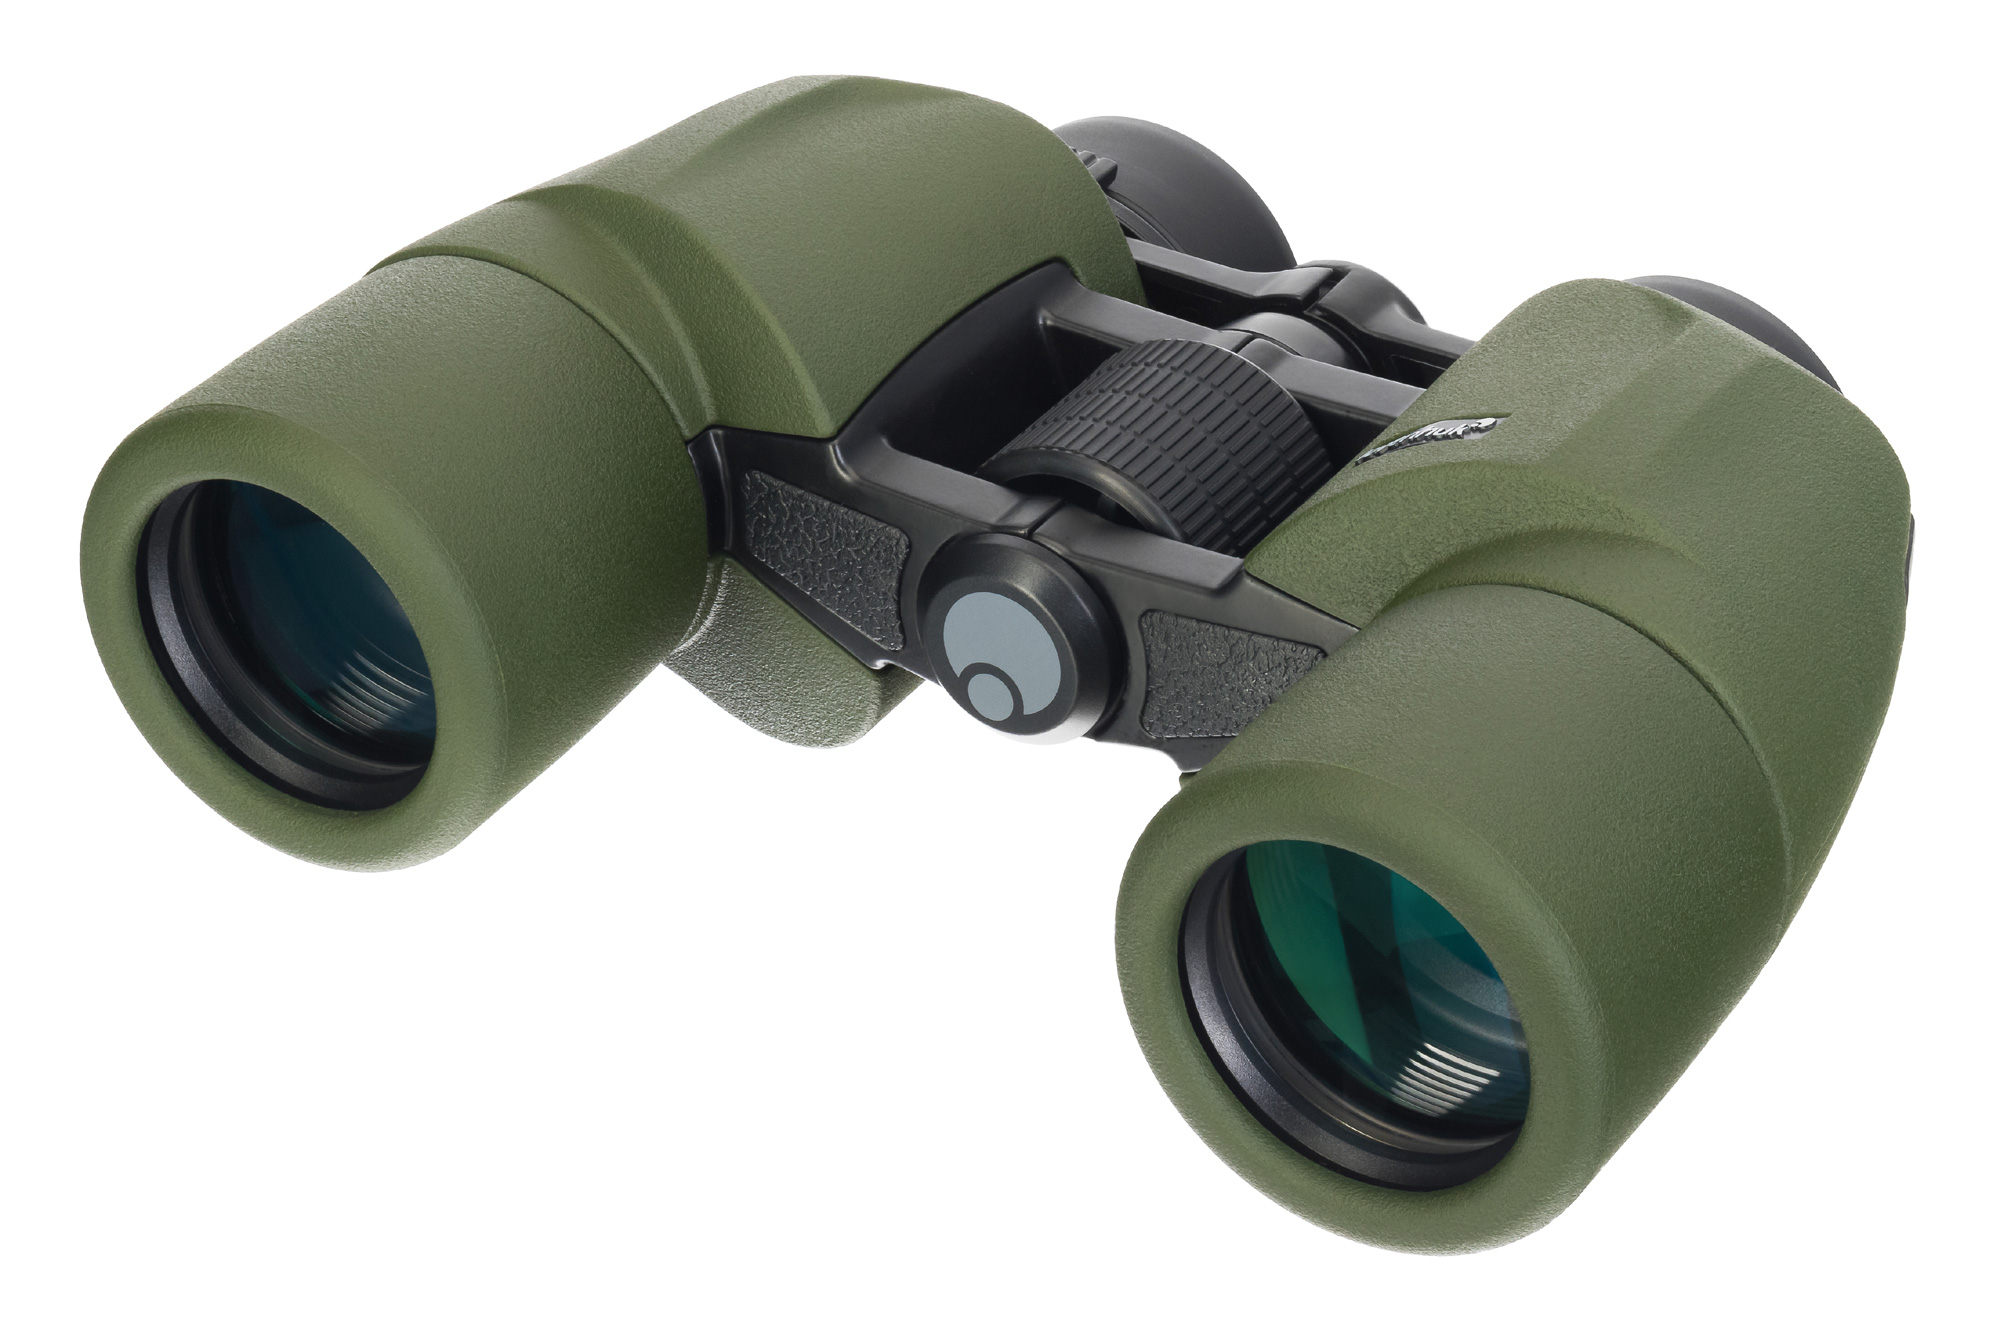 Levenhuk Army 10x40 Binoculars with Reticle – Buy from the